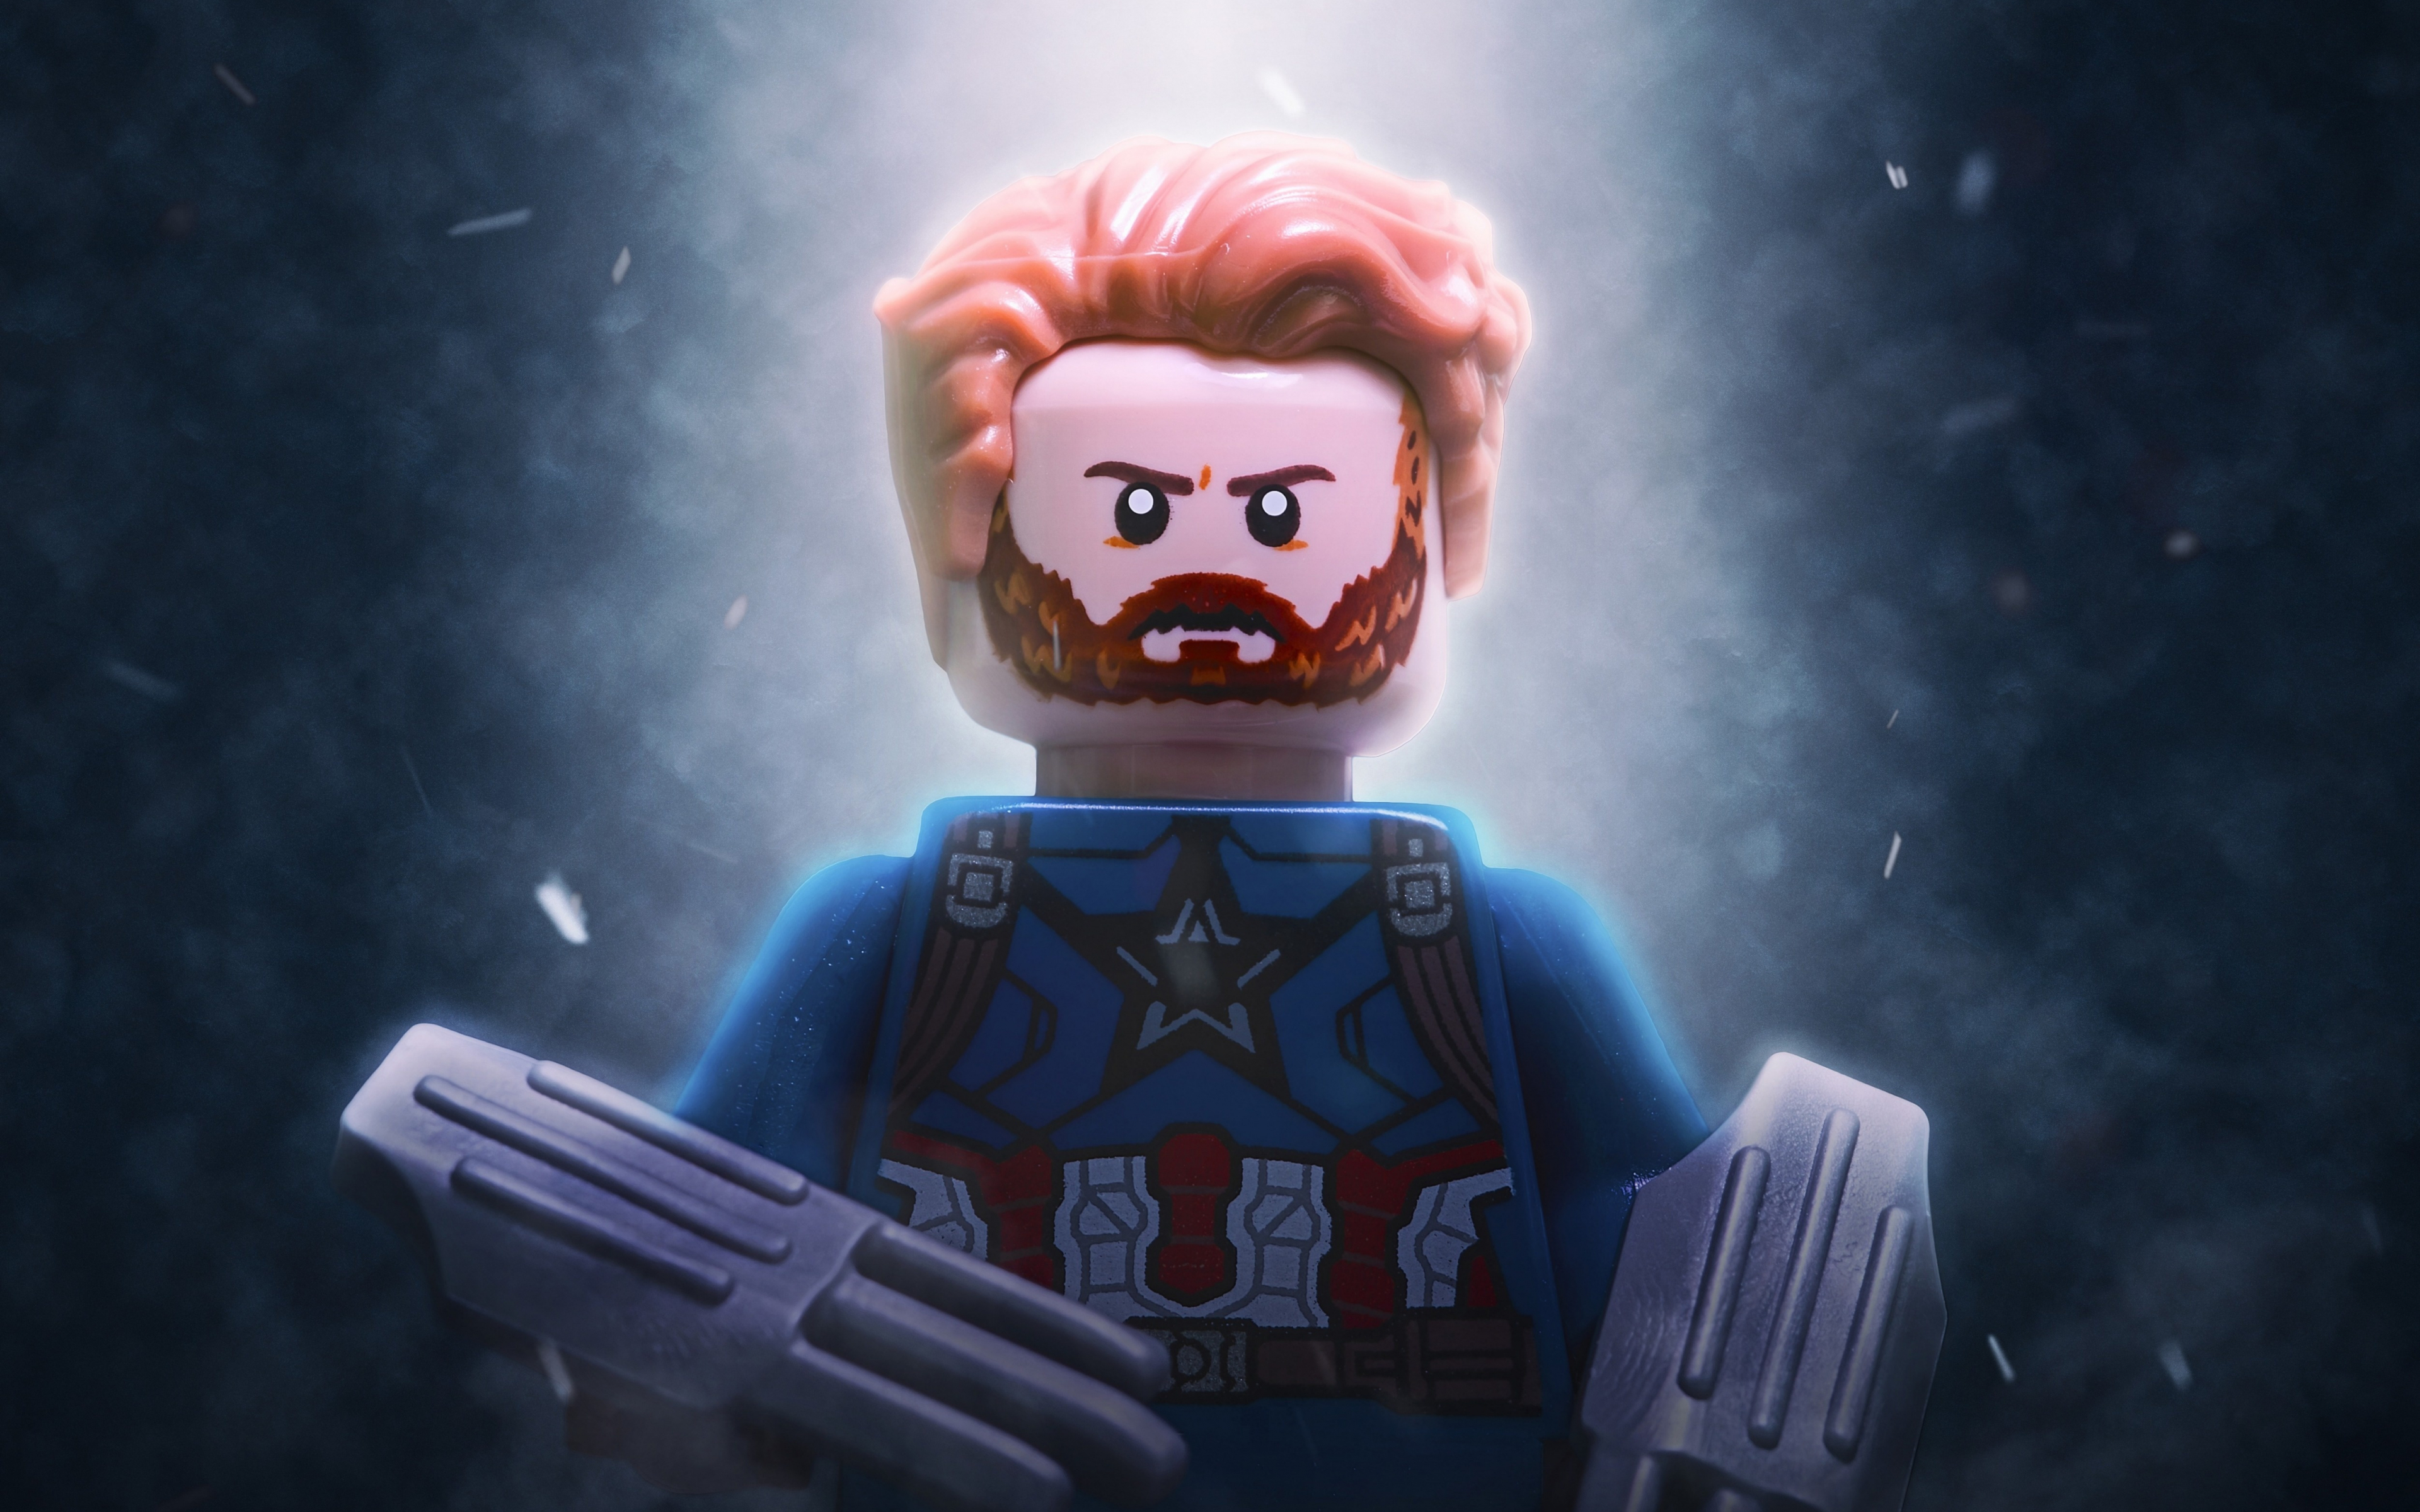 Download 3840x2400 Wallpaper Captain America Lego Toy